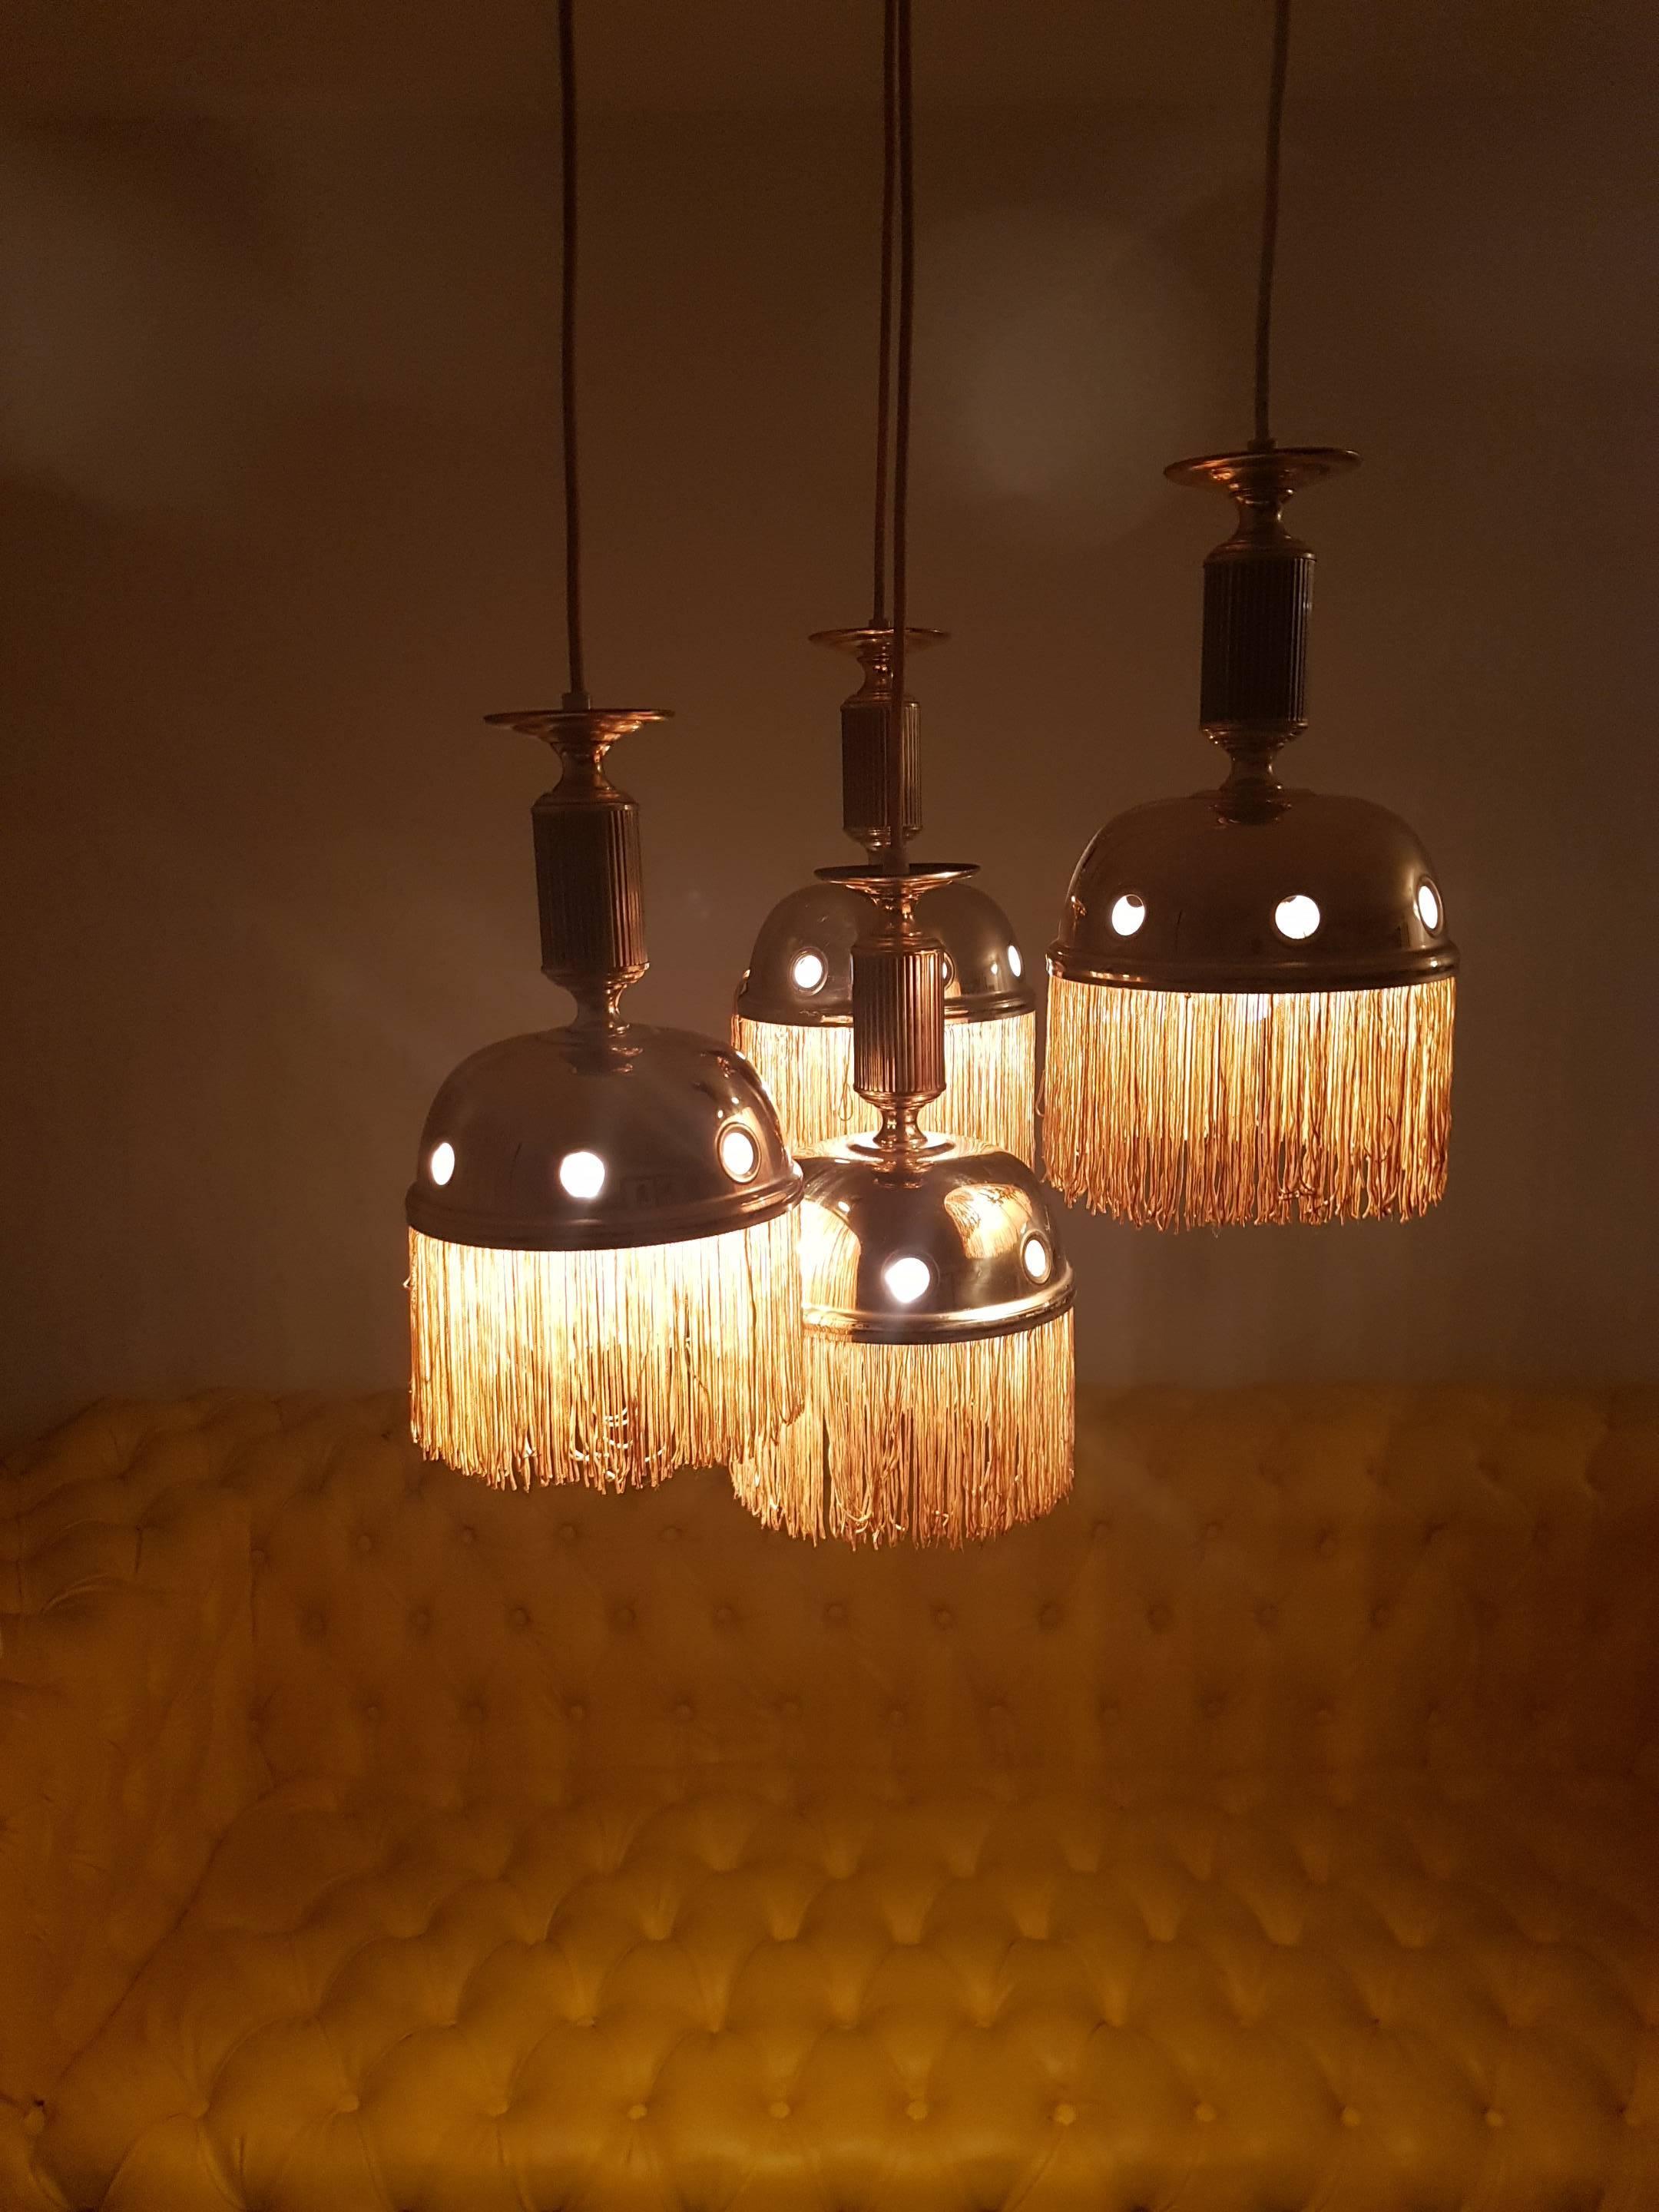 Set of one large chandelier and one Cascade chandelier so in total five lamps, very stylish 1960-1970s designer unknown but a eye catcher.
Measures: 38cm diameter for big lamp
and 50 cm for small group lamp
length of wire can be adjusted.

the 